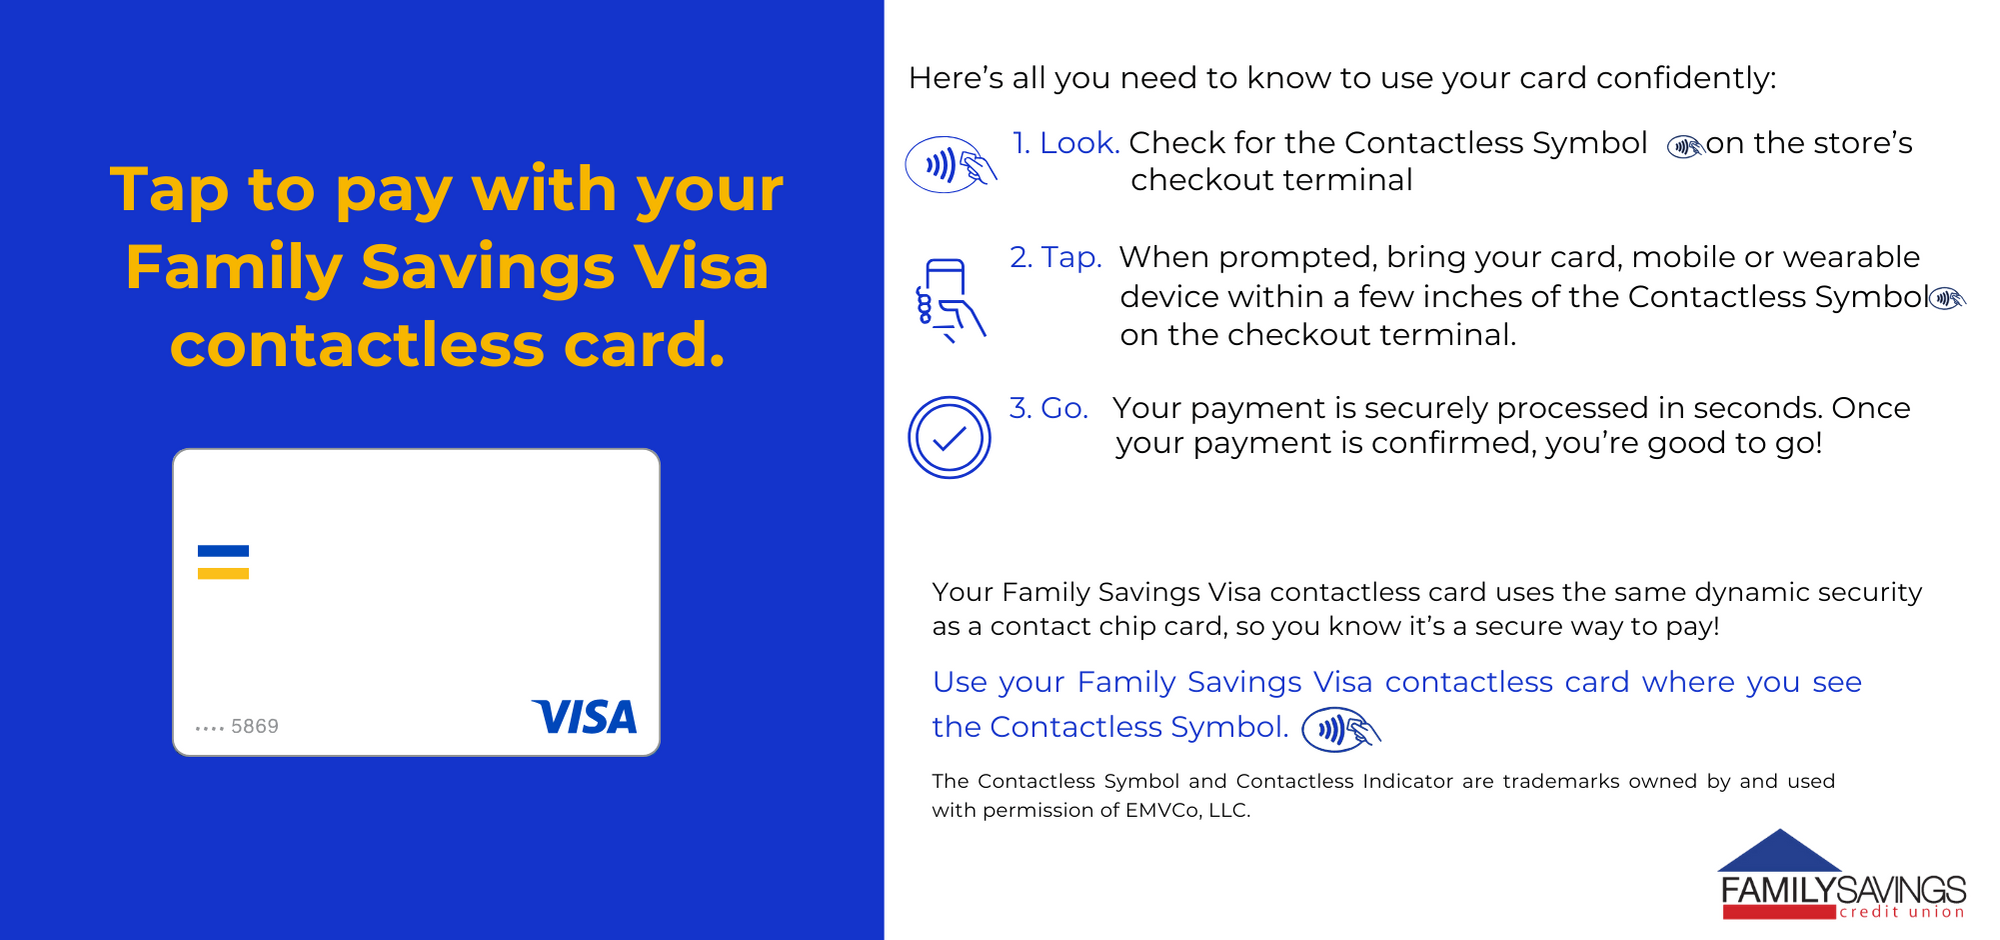 Unlock Convenience and Savings with the Family Savings Visa Contactless Card